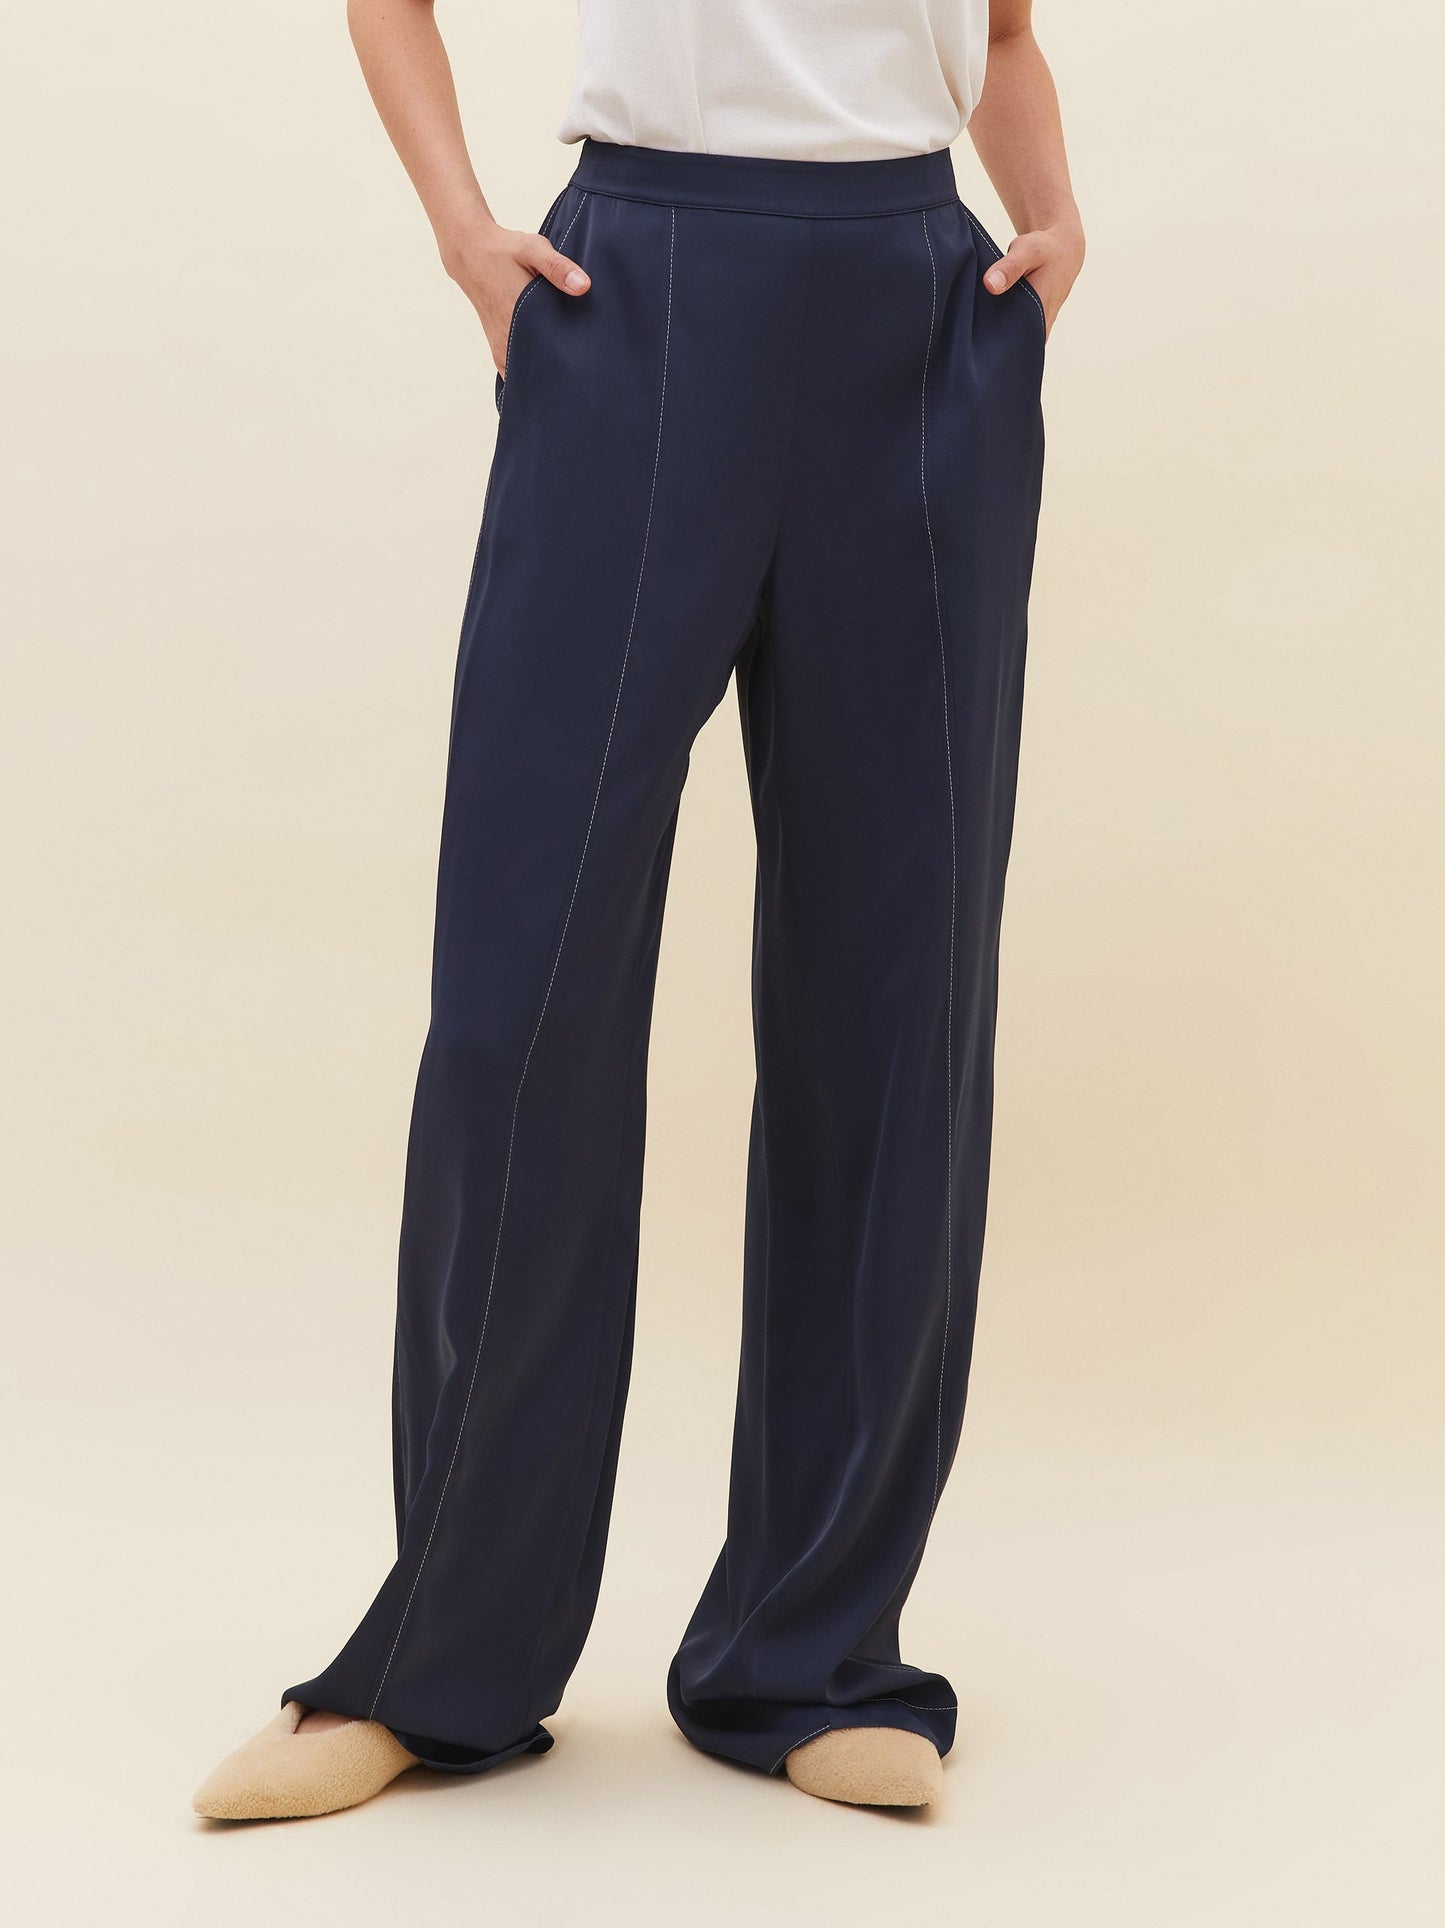 Navy Blue Leather Pants